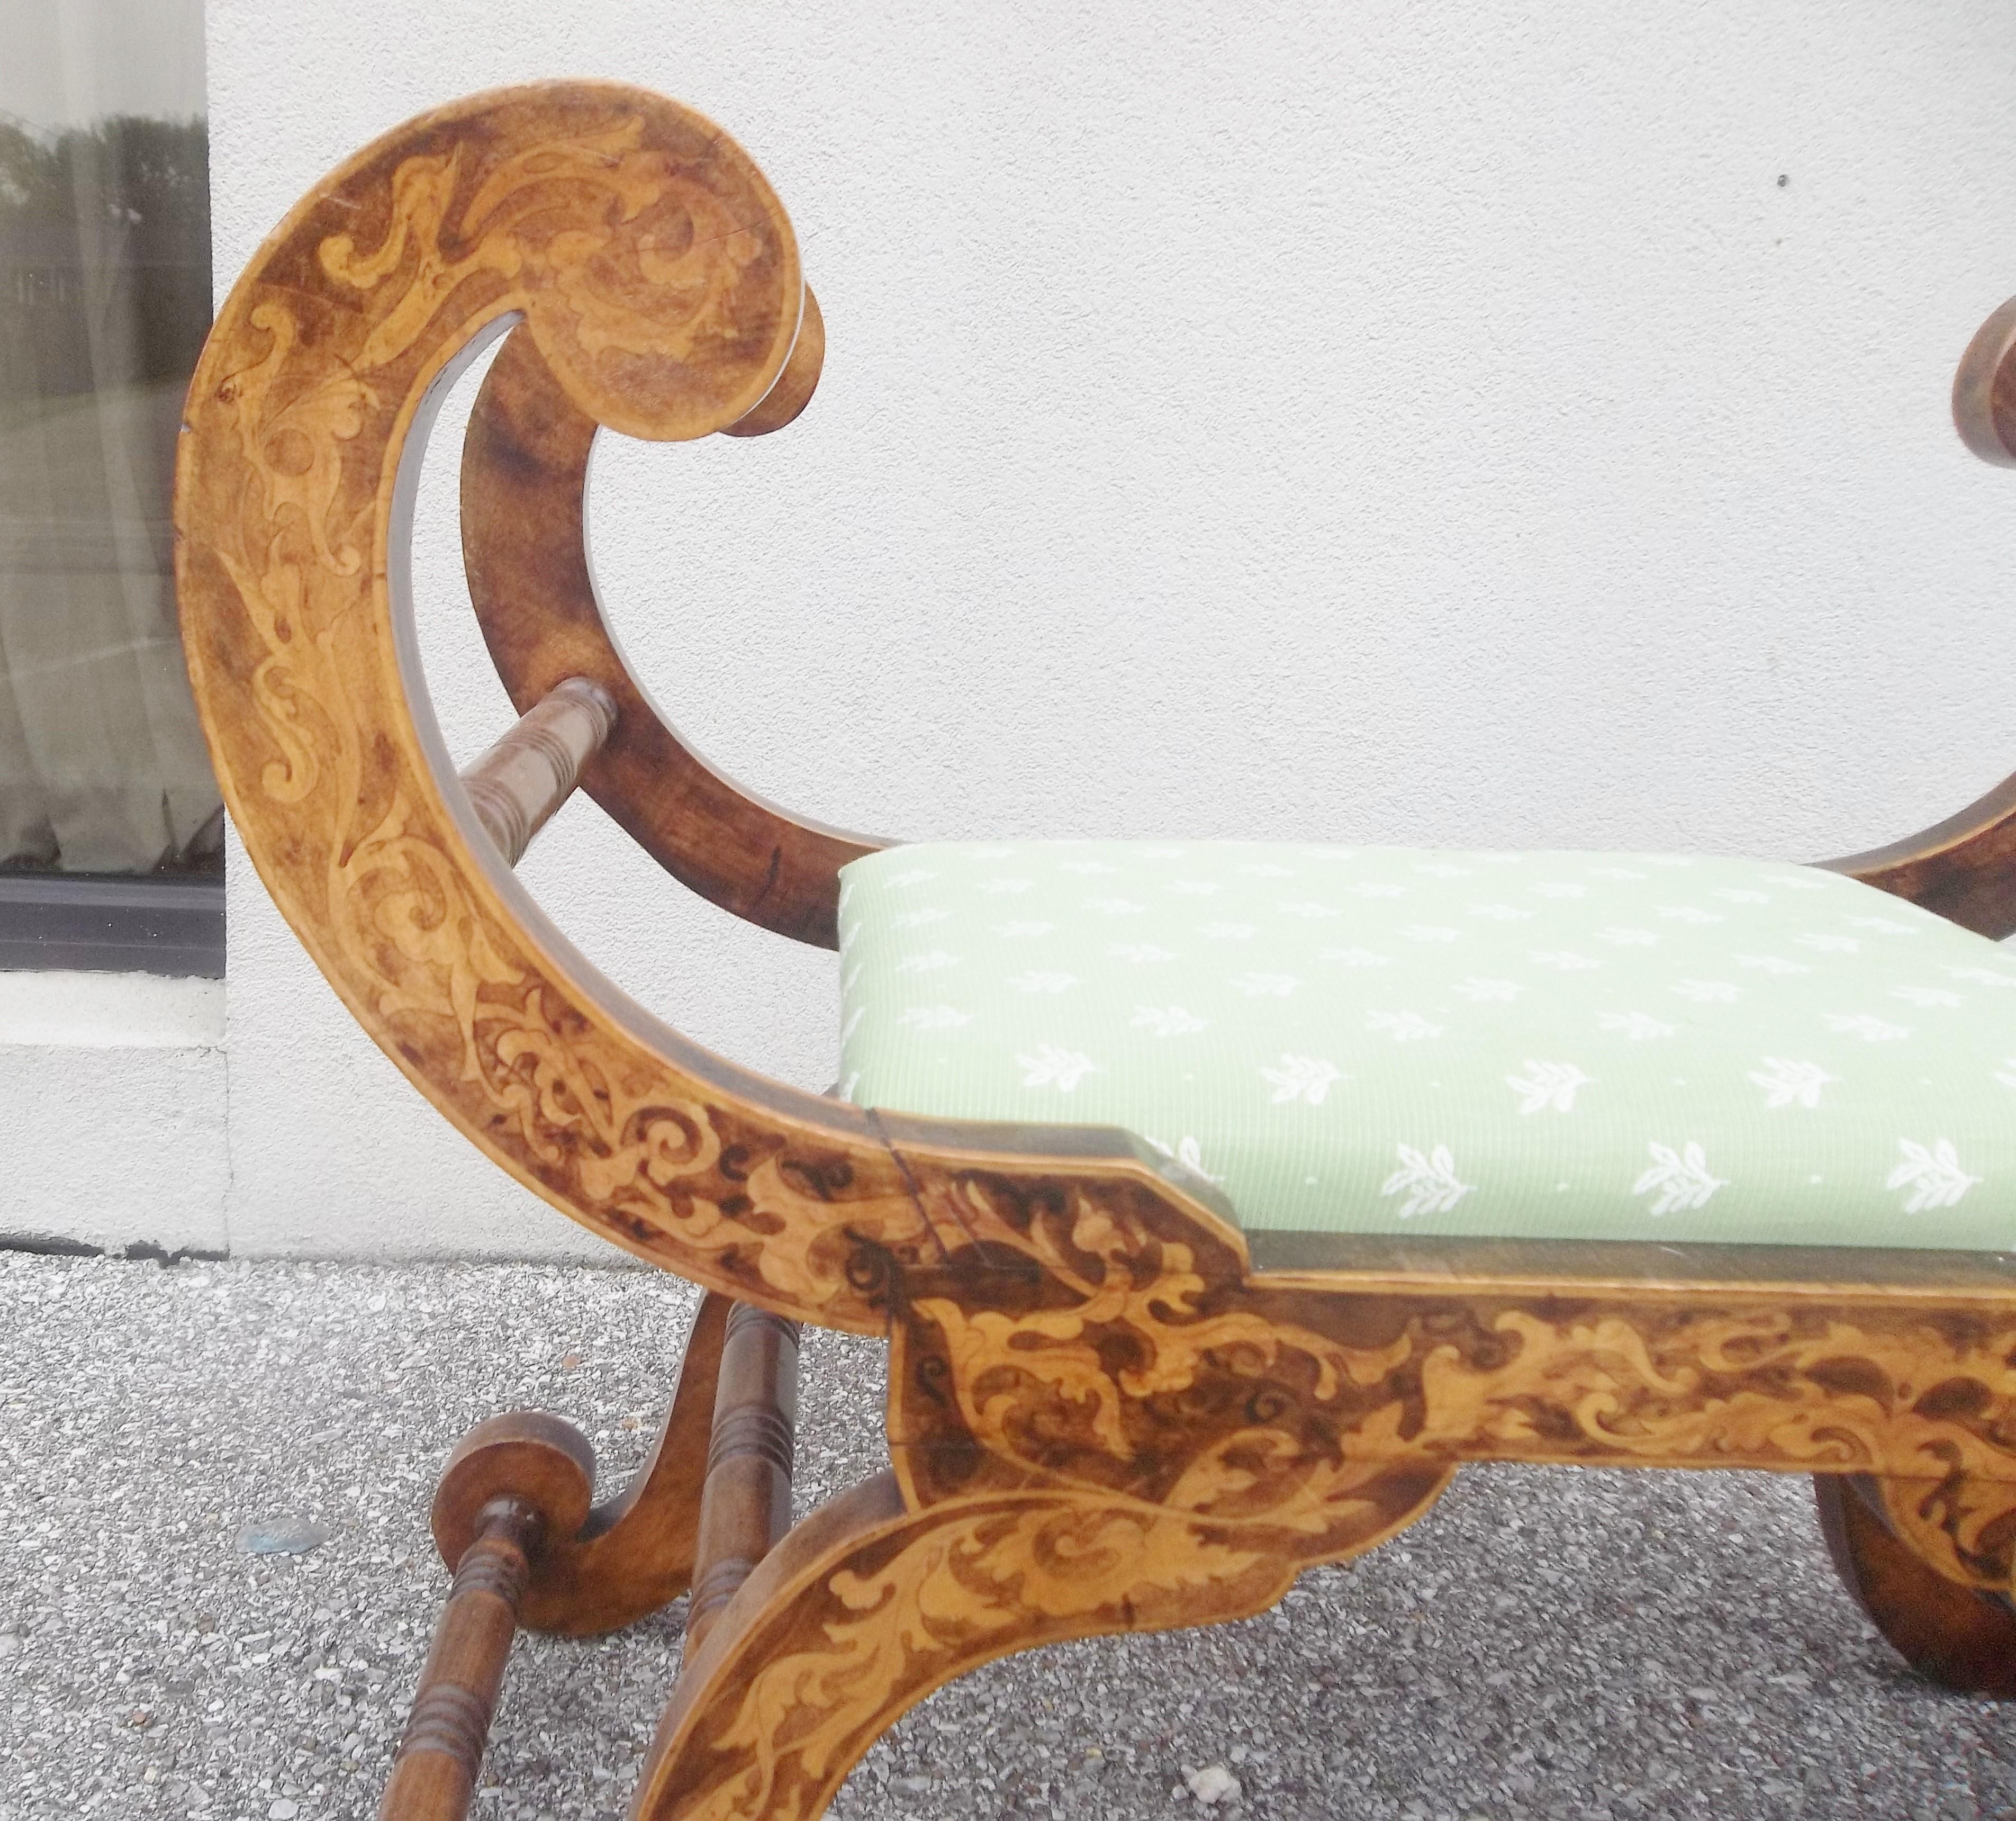 Wood Grained English Regency Style Curule Form Window Seat or Bench